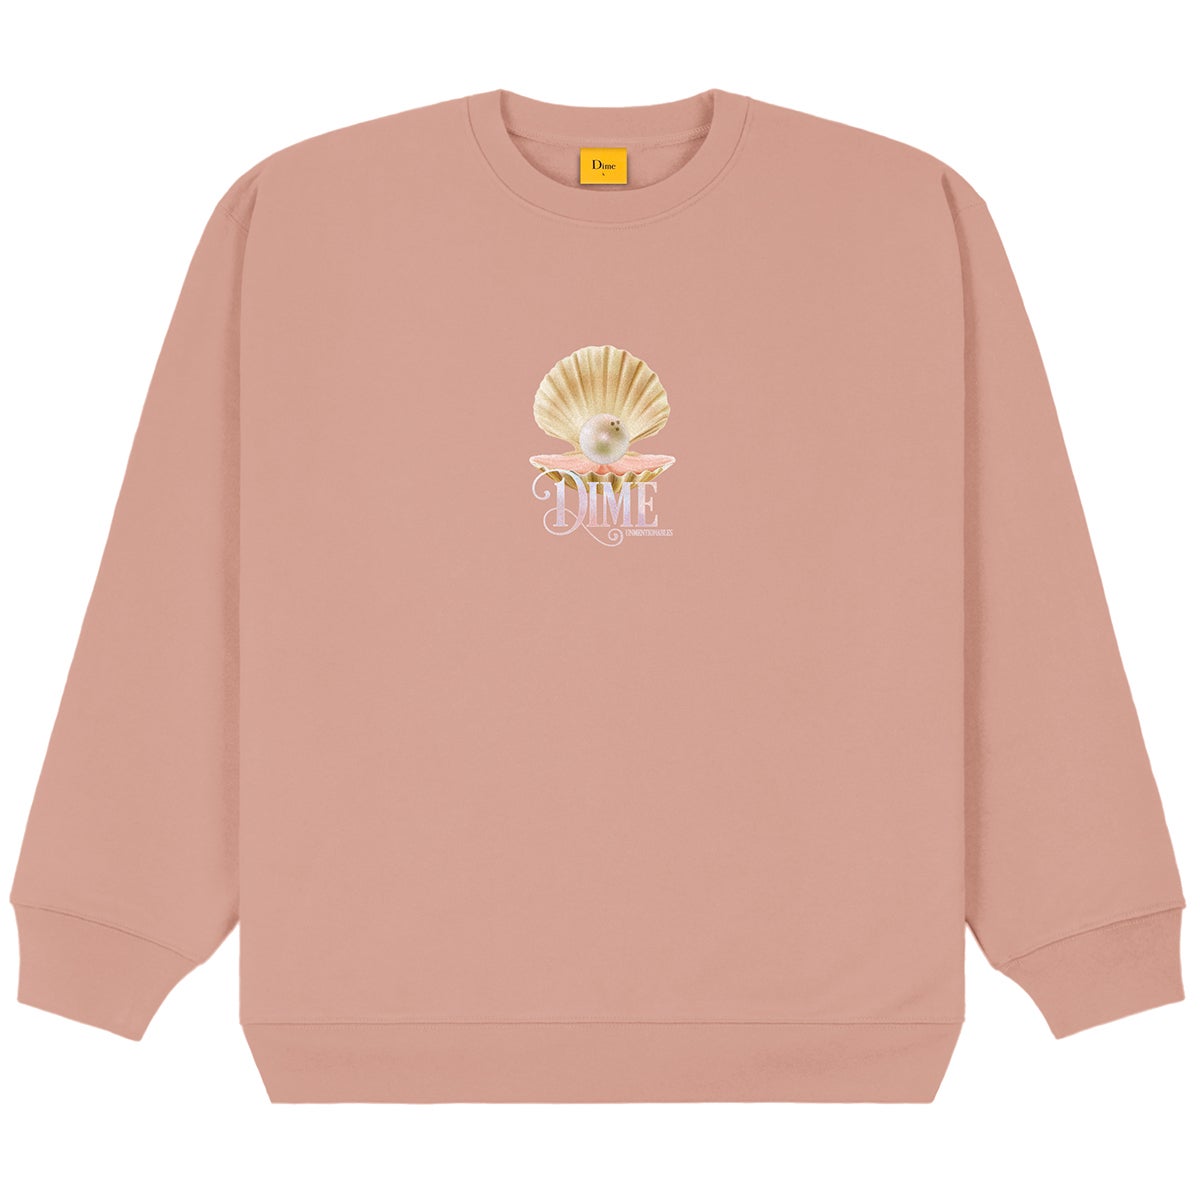 https://www.boardertown.co.nz/content/products/dime-underwear-crewneck-old-pink-1main-dm-fa22d1012.jpg